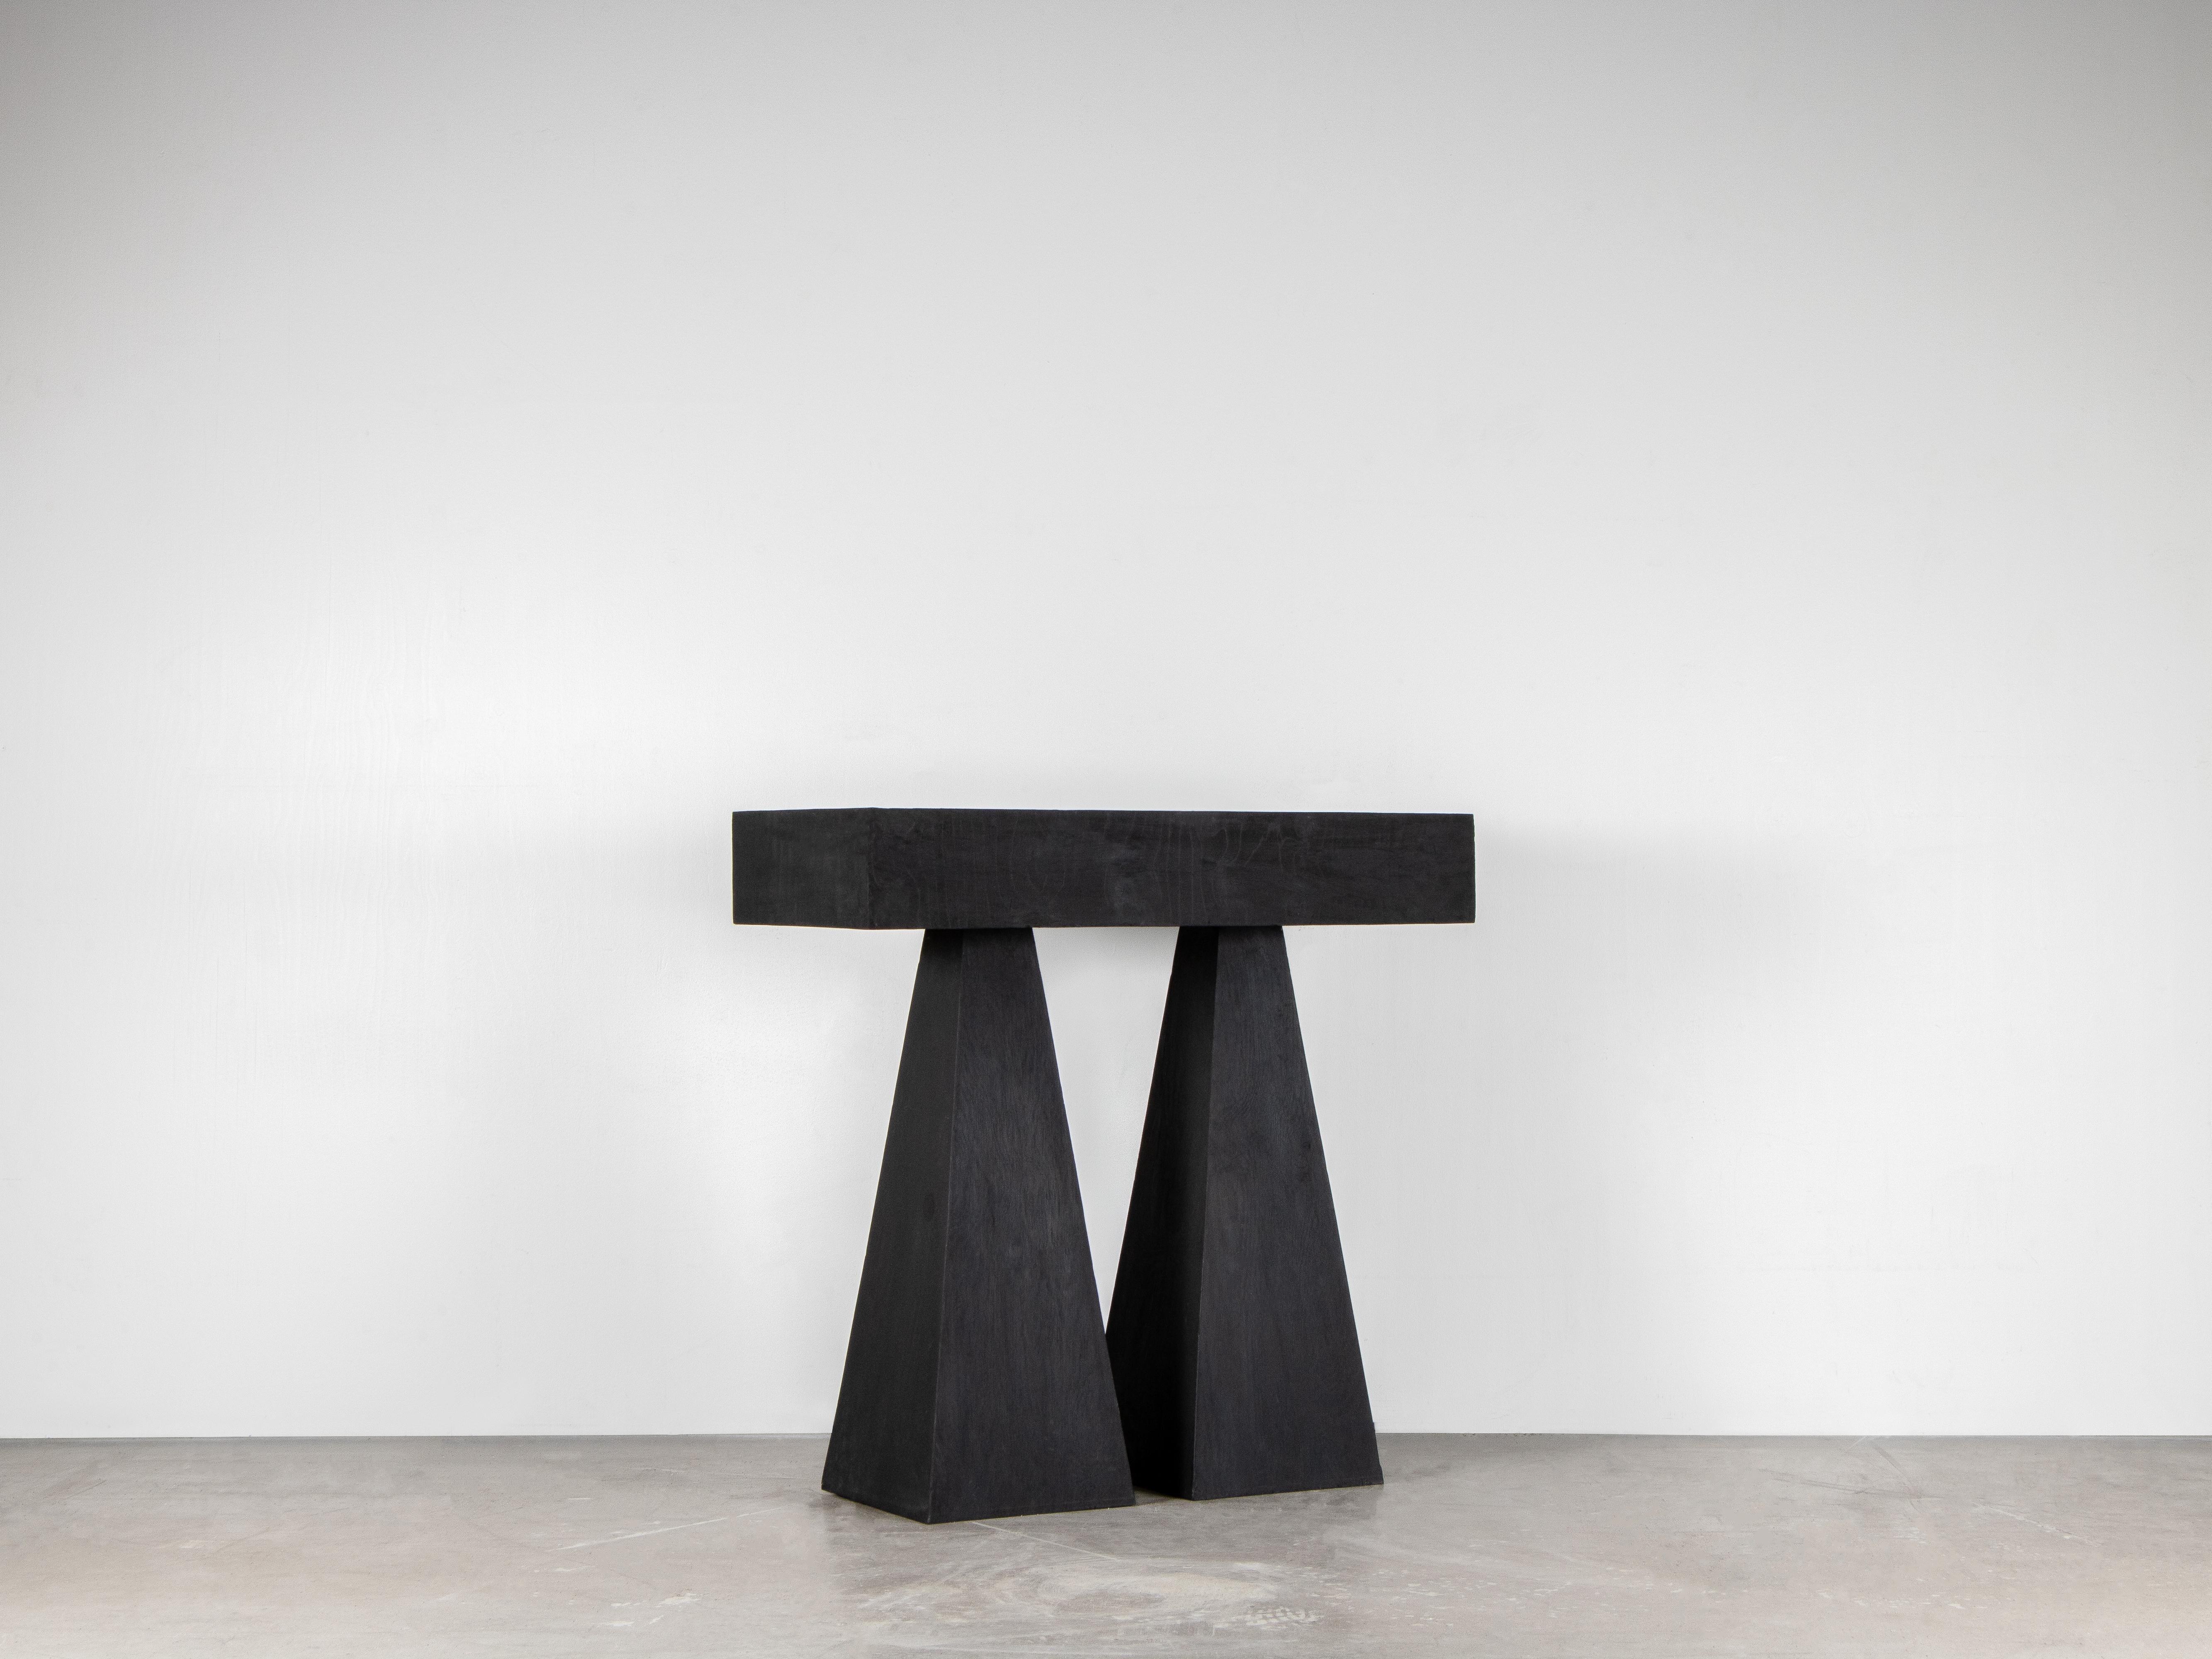 Contemporary Black Console Table in Hand-Waxed Plywood - Torn Table by Lucas Morten

2018
Limited edition of 29 +1 AP
Dimensions (cm): W 90,5 H 89 D 40
Material: hand-waxed plywood

Torn table with its two individual legs symbolizes the